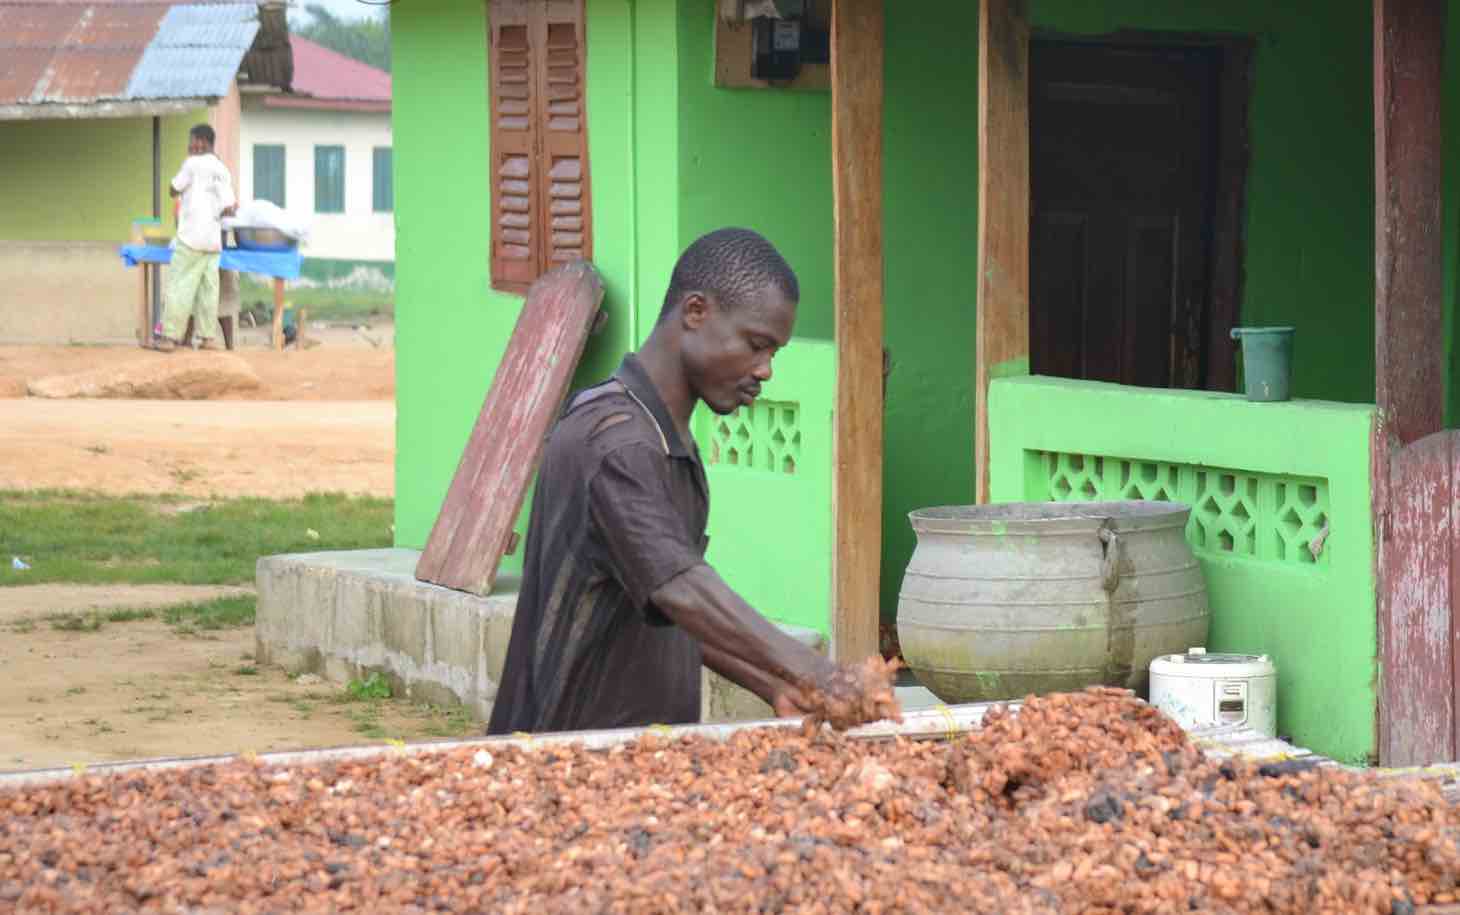 Man spreading cocoa beans on broad sheet next to building.